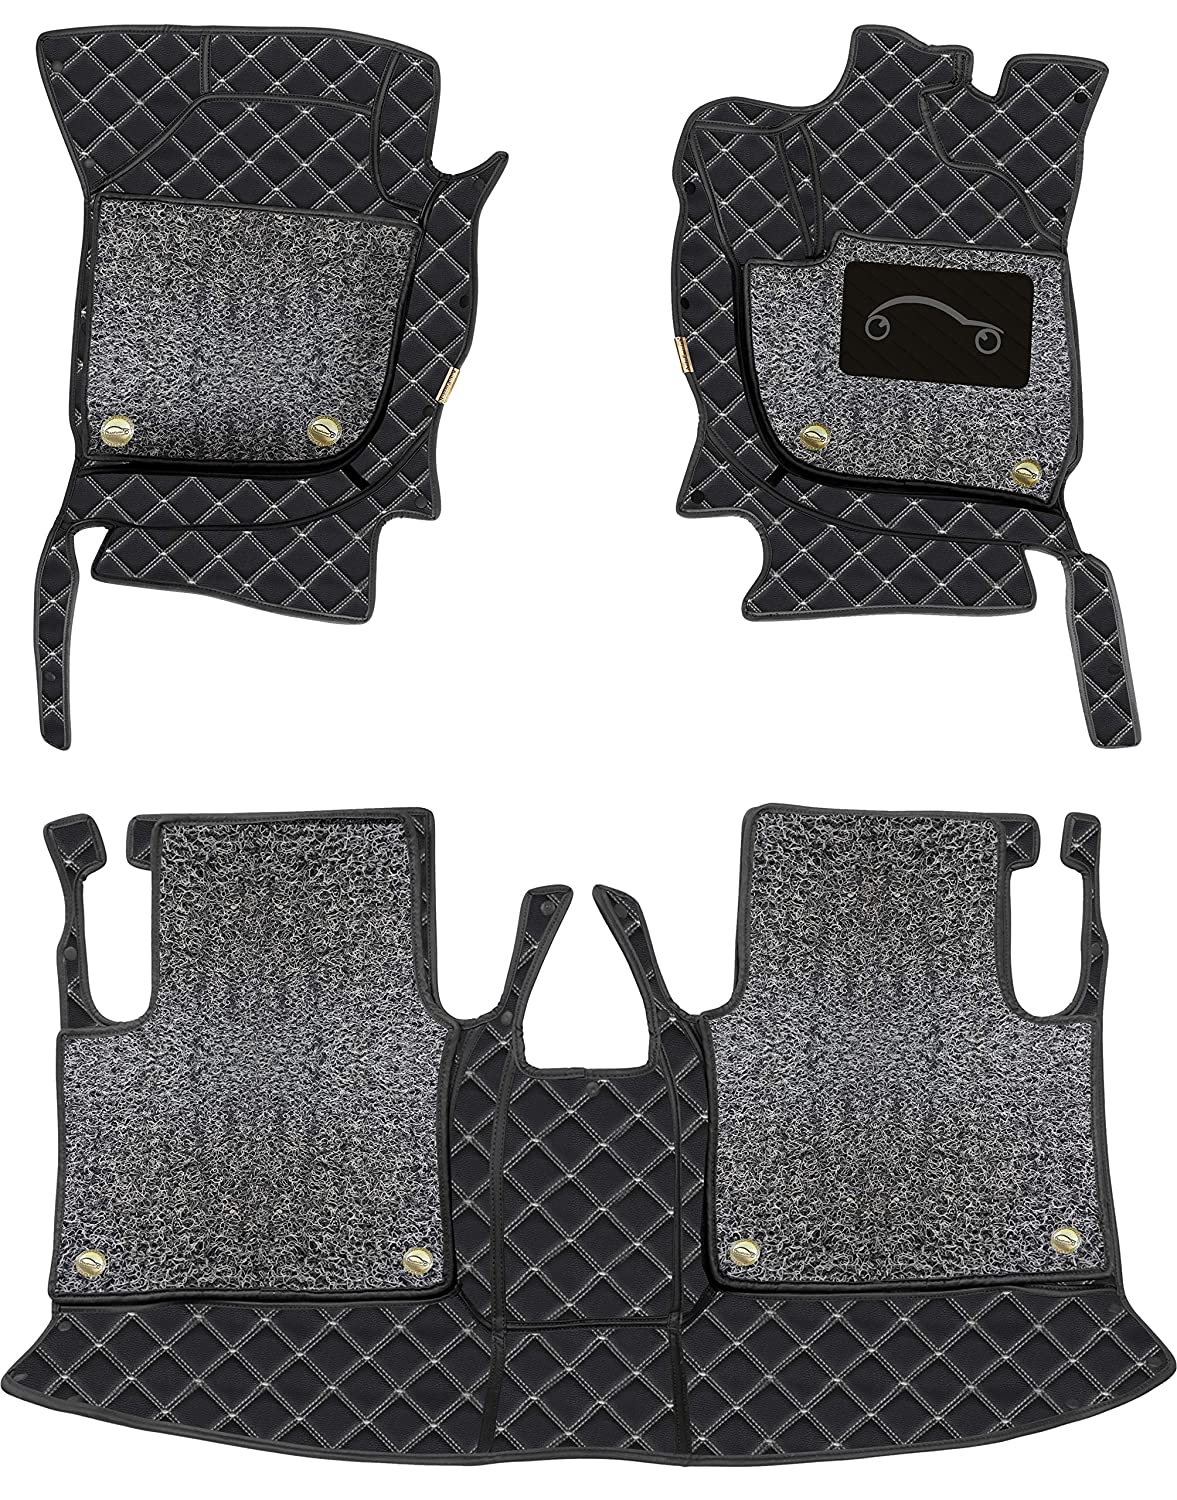 Land Rover Range Rover Evoque 2020 7D Luxury Car Mat, All Weather Proof, Anti-Skid, 100% Waterproof & Odorless with Unique Diamond Fish Design (24mm Luxury PU Leather, 2 Rows)